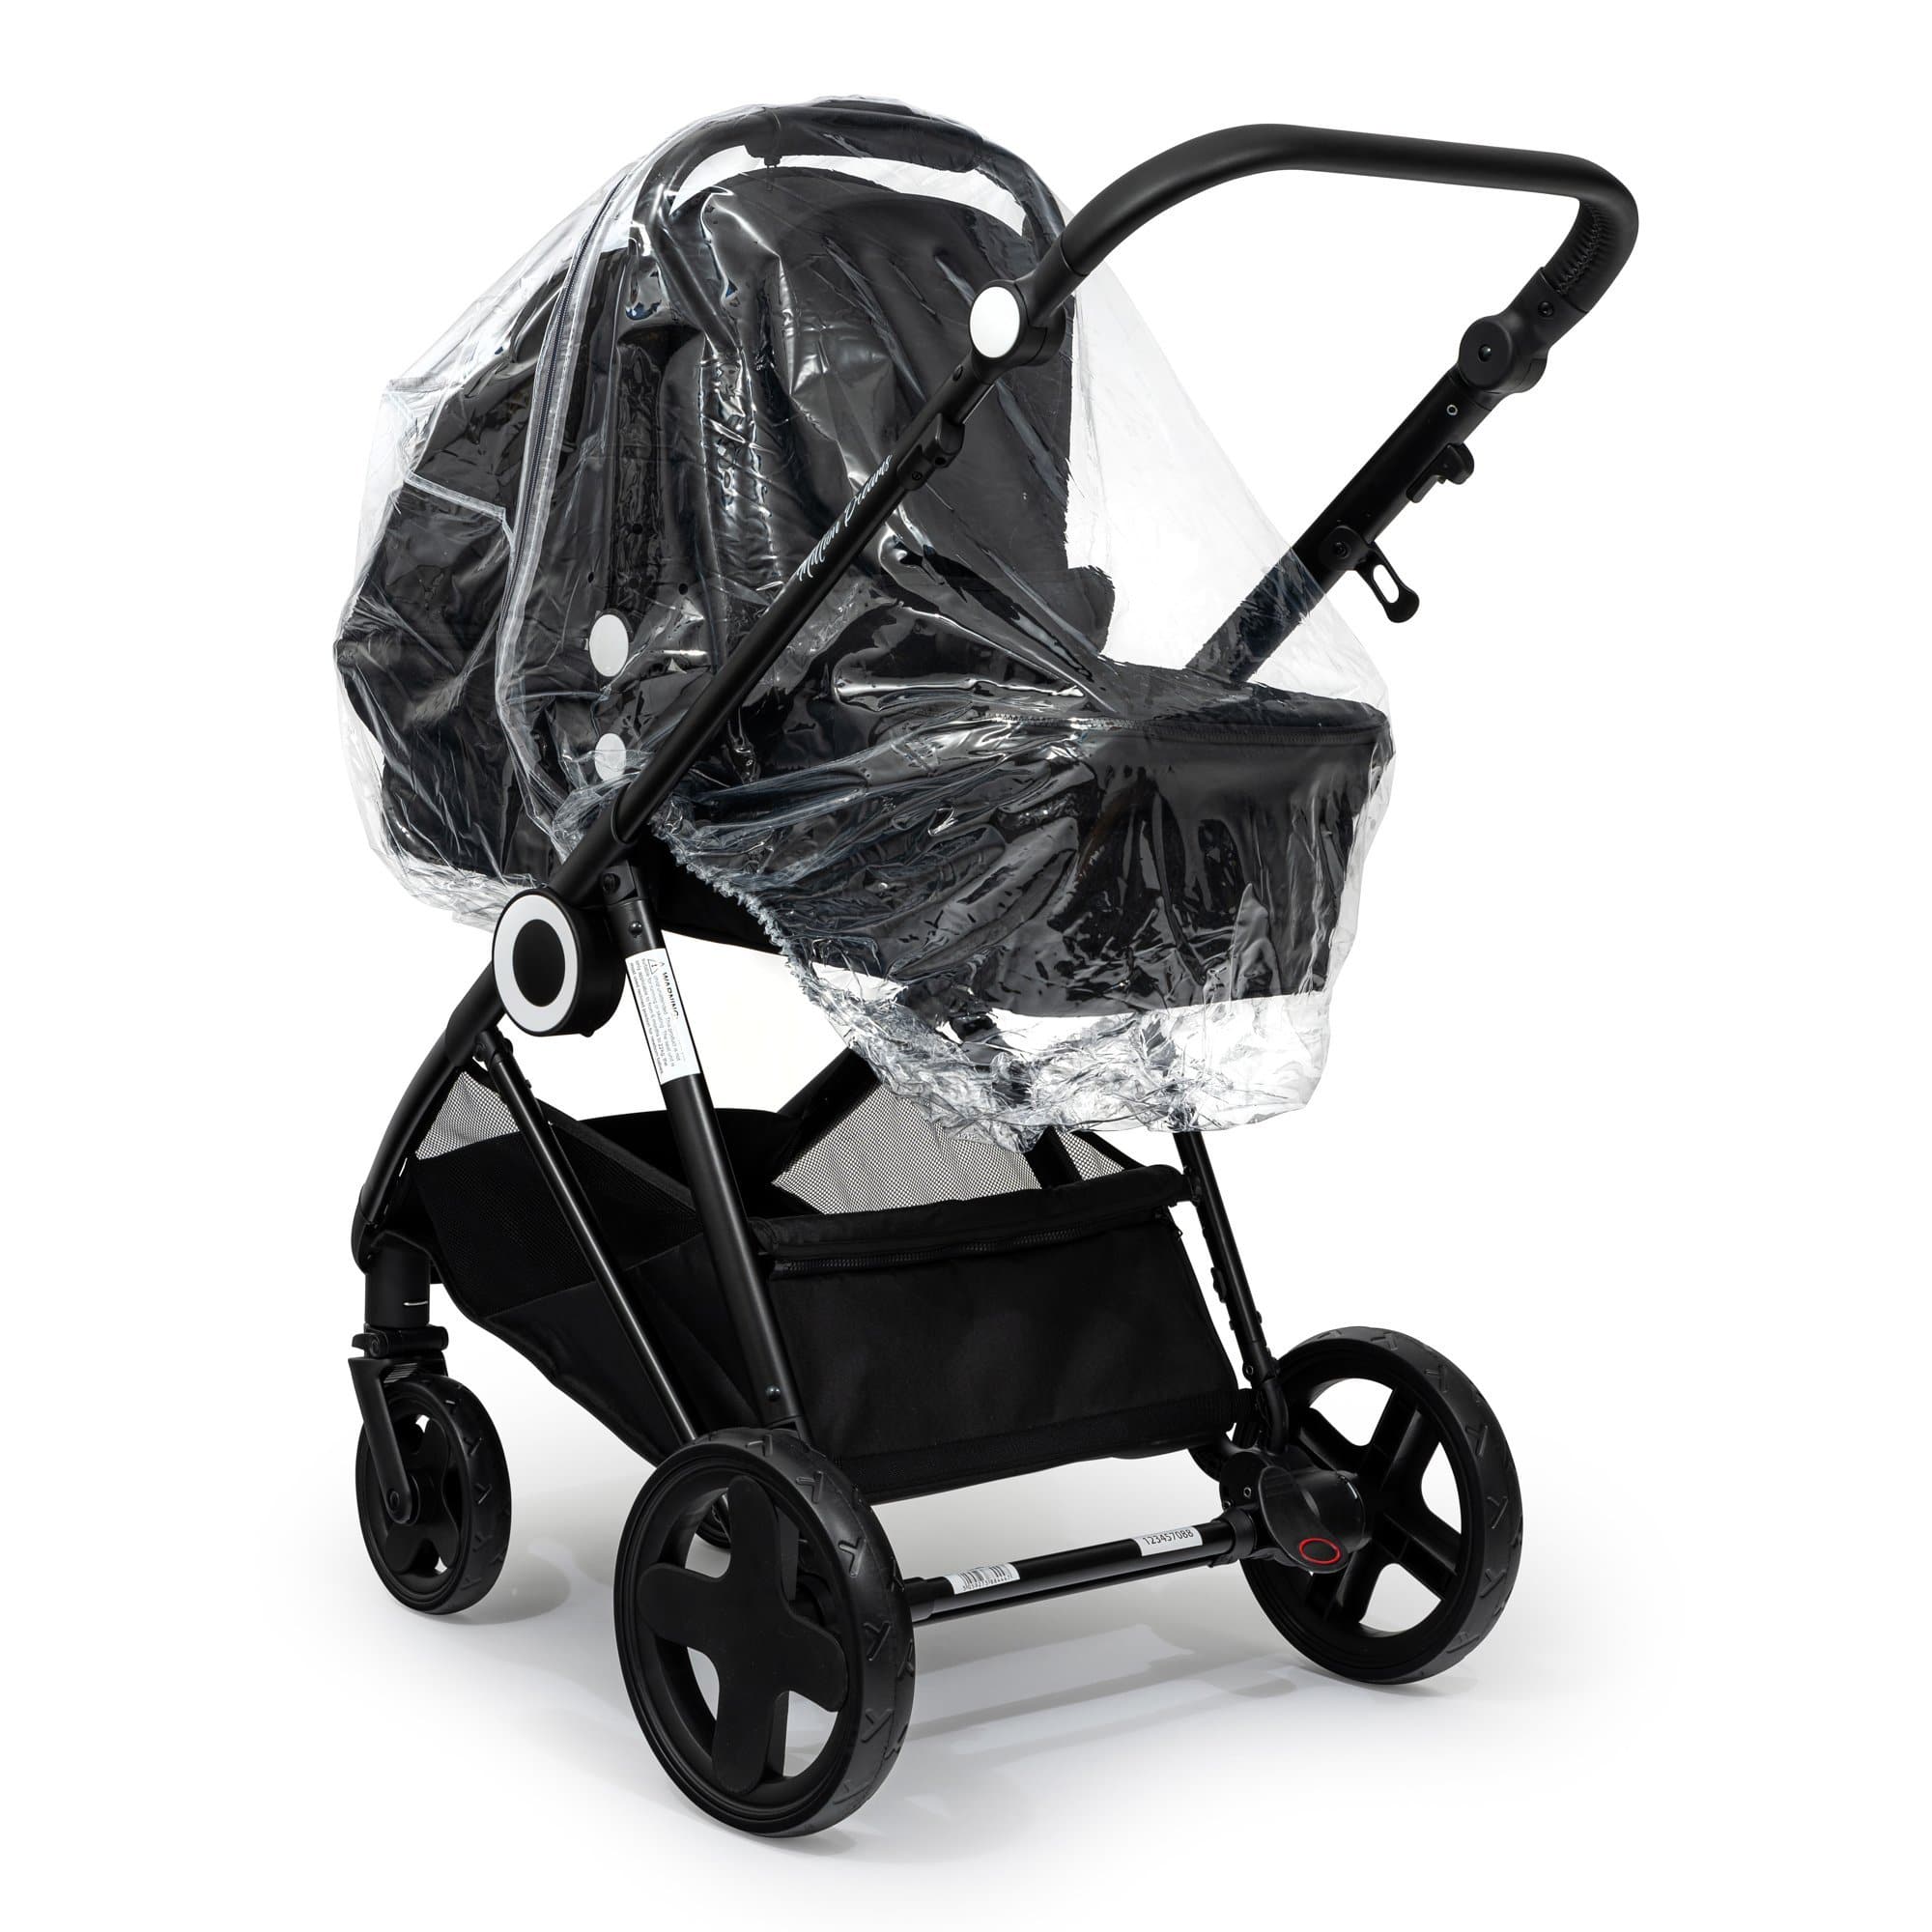 2 in 1 Rain Cover Compatible with Graco - Fits All Models - For Your Little One